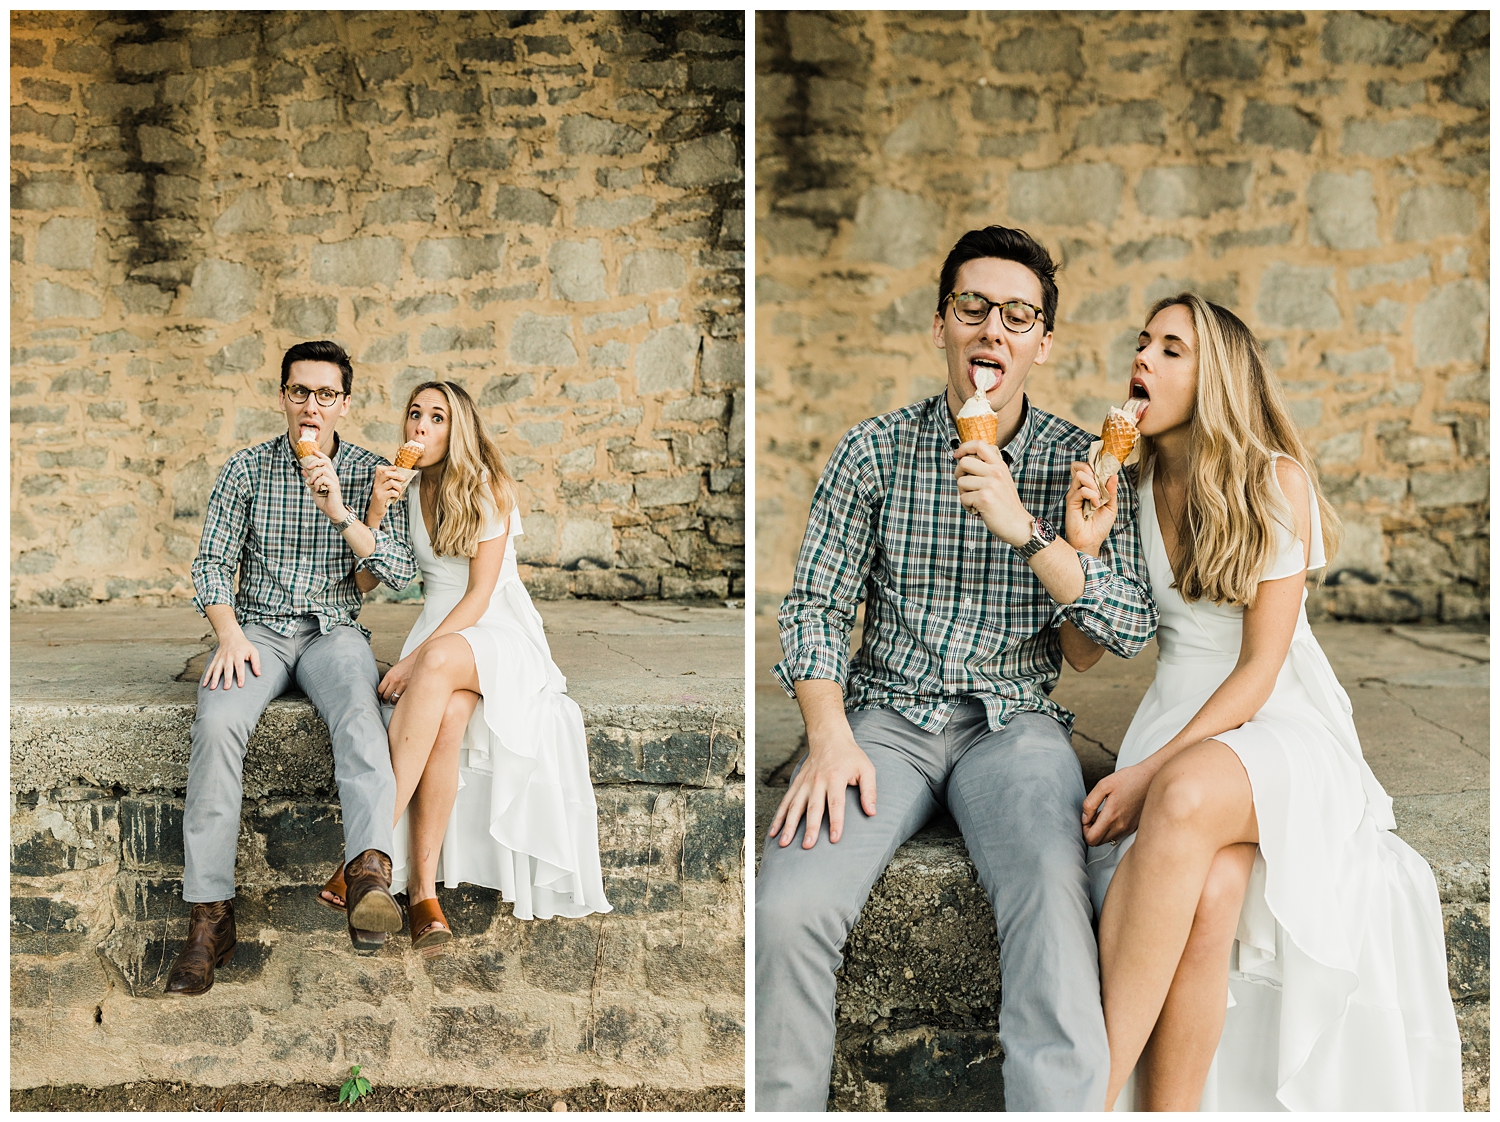 Atlanta, Georgia engagement session of a young couple kissing and eating ice cream together on the Atlanta Beltline